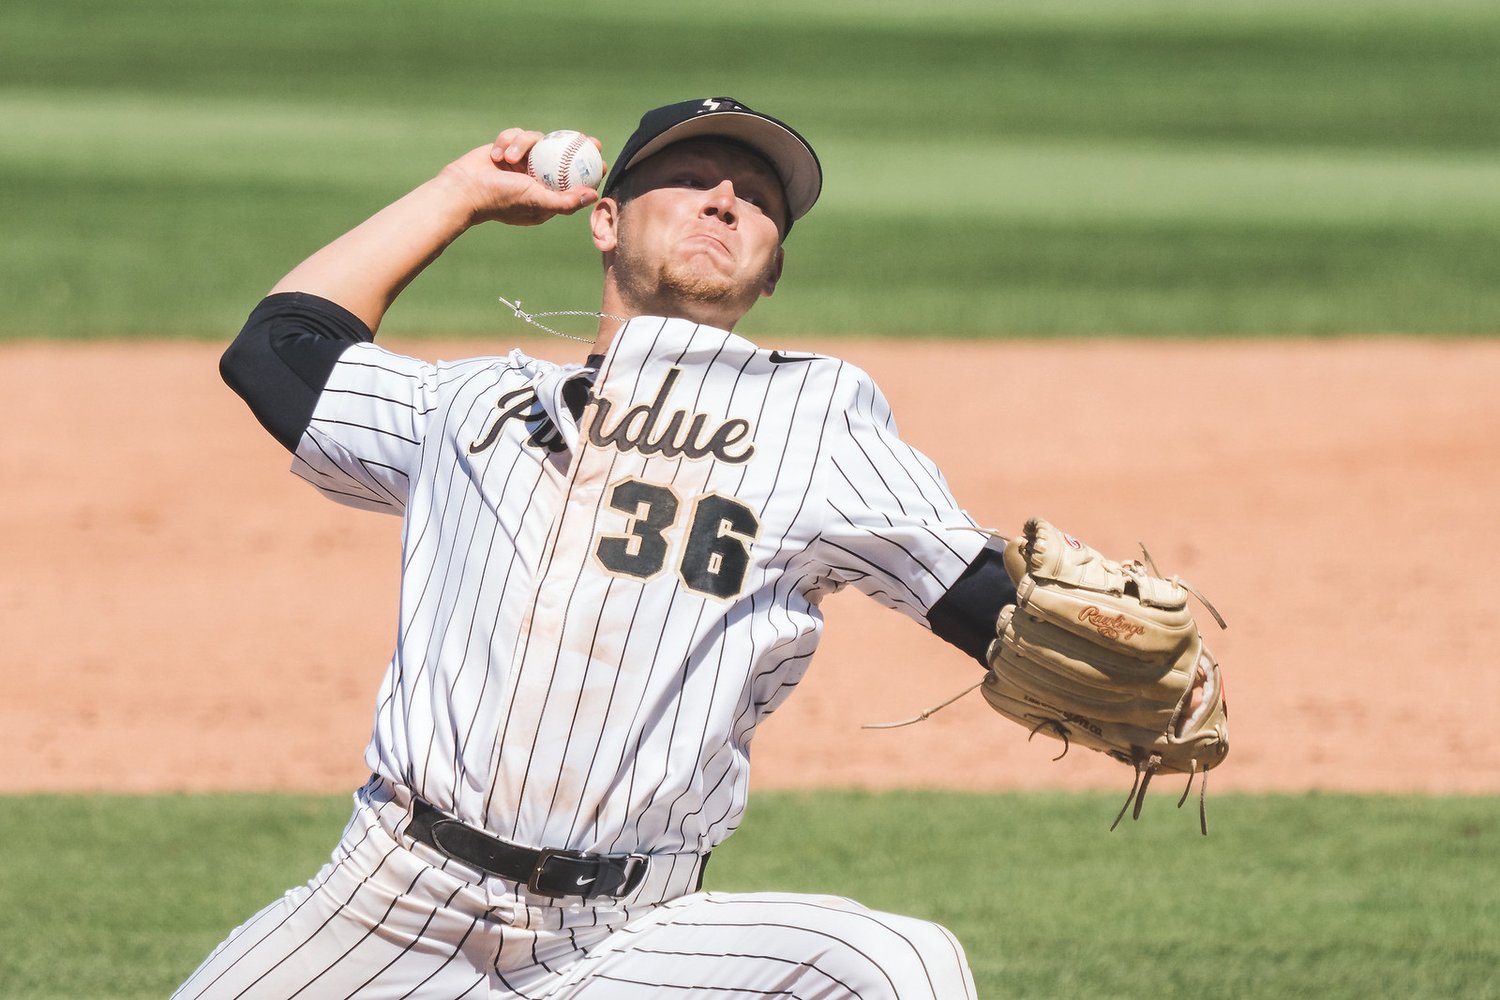 Former Crawfordsville baseball star Trent Johnson pitched for Purdue for a final time last Saturday.